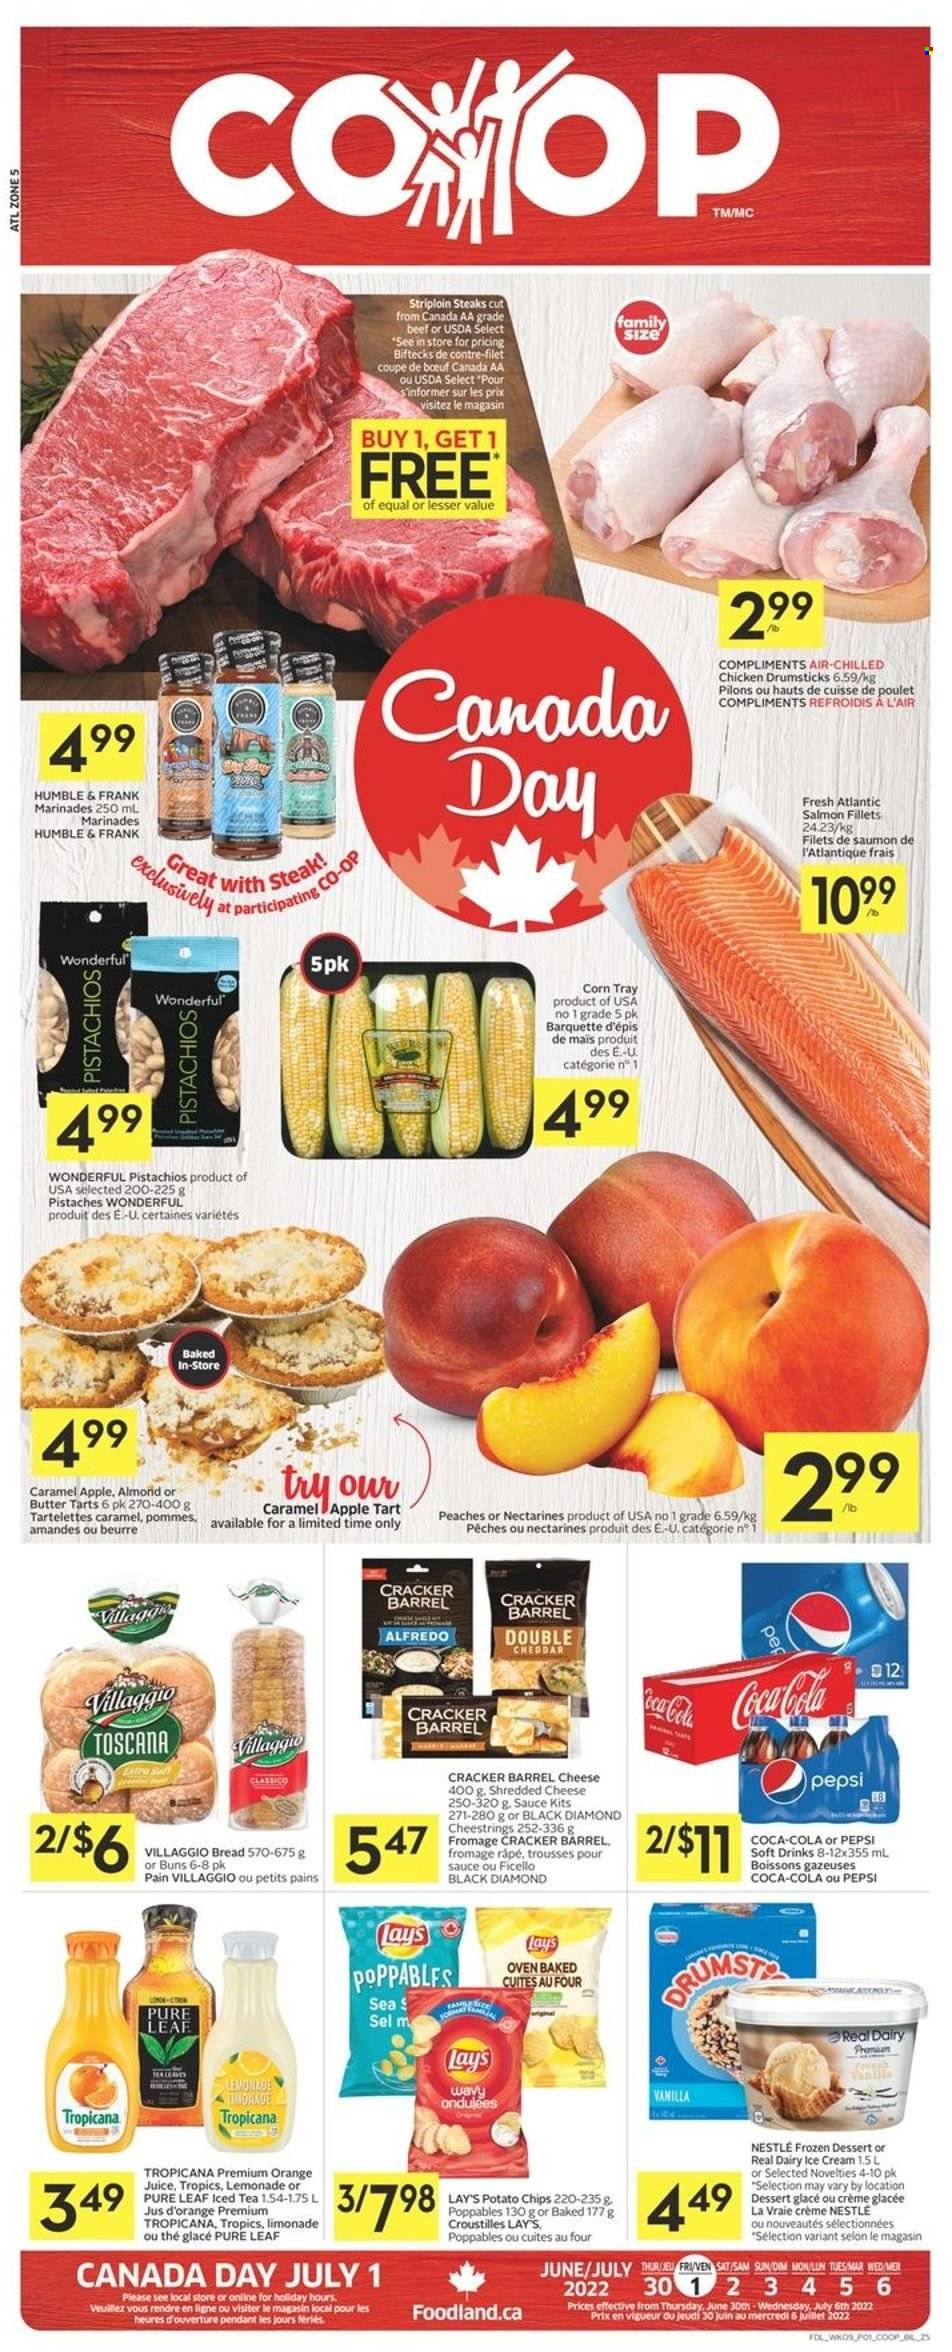 thumbnail - Co-op Flyer - June 30, 2022 - July 06, 2022 - Sales products - bread, tart, buns, corn, nectarines, peaches, salmon, salmon fillet, sauce, shredded cheese, string cheese, butter, ice cream, crackers, potato chips, Lay’s, Classico, pistachios, Coca-Cola, lemonade, Pepsi, orange juice, juice, ice tea, soft drink, Pure Leaf, chicken drumsticks, chicken, beef meat, striploin steak, Nestlé, steak. Page 1.